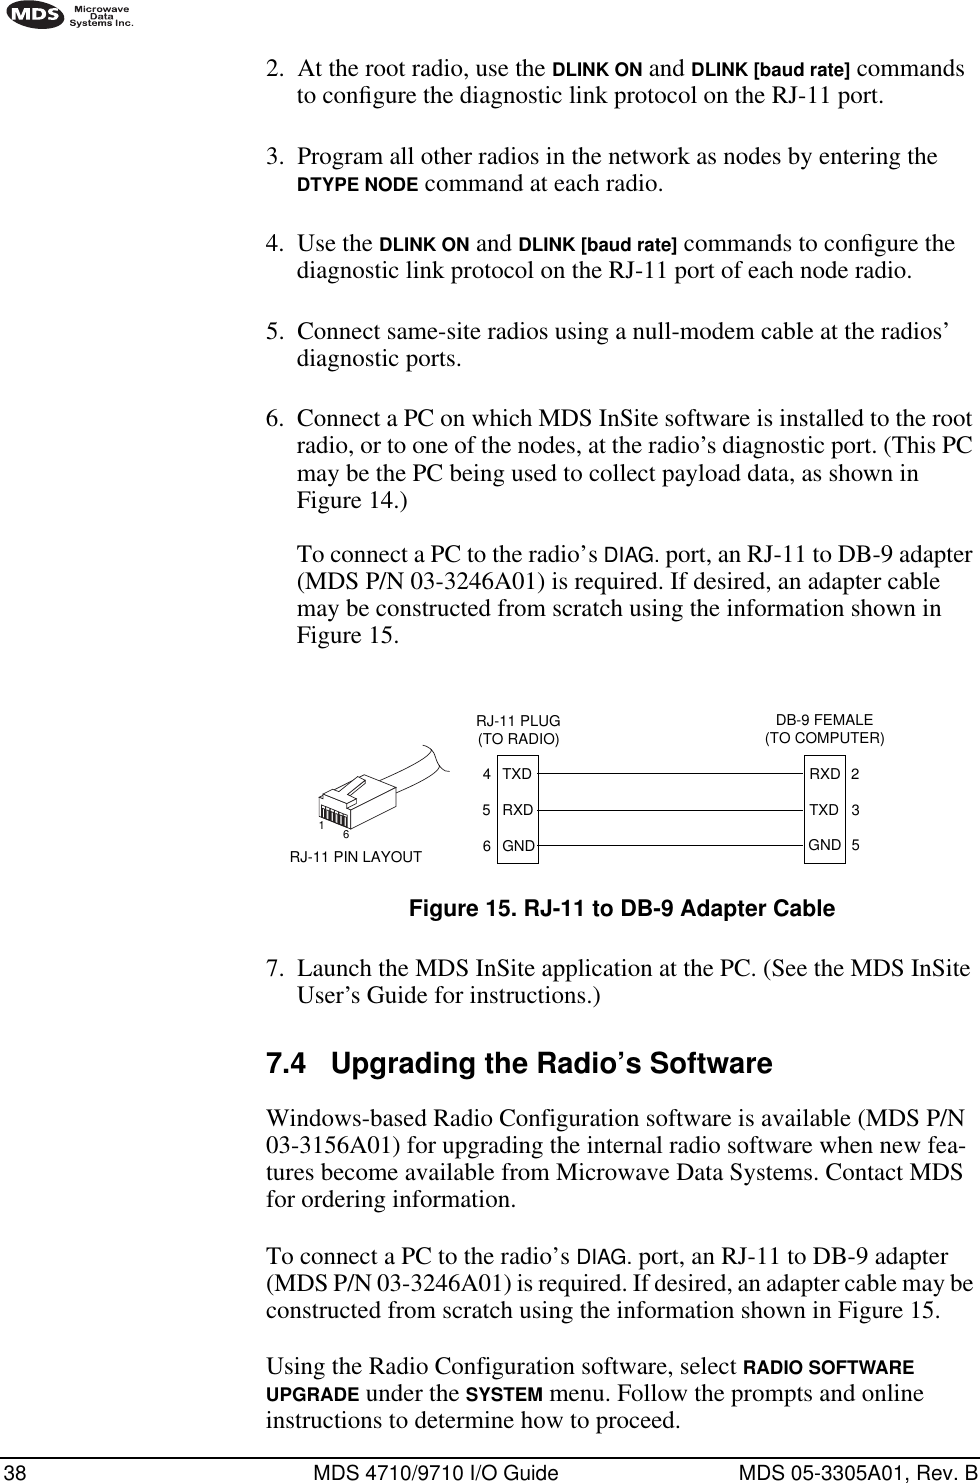 38 MDS 4710/9710 I/O Guide MDS 05-3305A01, Rev. B2. At the root radio, use the DLINK ON and DLINK [baud rate] commands to conﬁgure the diagnostic link protocol on the RJ-11 port.3. Program all other radios in the network as nodes by entering the DTYPE NODE command at each radio.4. Use the DLINK ON and DLINK [baud rate] commands to conﬁgure the diagnostic link protocol on the RJ-11 port of each node radio.5. Connect same-site radios using a null-modem cable at the radios’ diagnostic ports.6. Connect a PC on which MDS InSite software is installed to the root radio, or to one of the nodes, at the radio’s diagnostic port. (This PC may be the PC being used to collect payload data, as shown in Figure 14.)To connect a PC to the radio’s DIAG. port, an RJ-11 to DB-9 adapter (MDS P/N 03-3246A01) is required. If desired, an adapter cable may be constructed from scratch using the information shown in Figure 15.Invisible place holderFigure 15. RJ-11 to DB-9 Adapter Cable7. Launch the MDS InSite application at the PC. (See the MDS InSite User’s Guide for instructions.)7.4 Upgrading the Radio’s SoftwareWindows-based Radio Configuration software is available (MDS P/N 03-3156A01) for upgrading the internal radio software when new fea-tures become available from Microwave Data Systems. Contact MDS for ordering information.To connect a PC to the radio’s DIAG. port, an RJ-11 to DB-9 adapter (MDS P/N 03-3246A01) is required. If desired, an adapter cable may be constructed from scratch using the information shown in Figure 15.Using the Radio Configuration software, select RADIO SOFTWARE UPGRADE under the SYSTEM menu. Follow the prompts and online instructions to determine how to proceed.RXDTXDGND235DB-9 FEMALE(TO COMPUTER)TXDRXDGND456RJ-11 PLUG(TO RADIO)RJ-11 PIN LAYOUT16